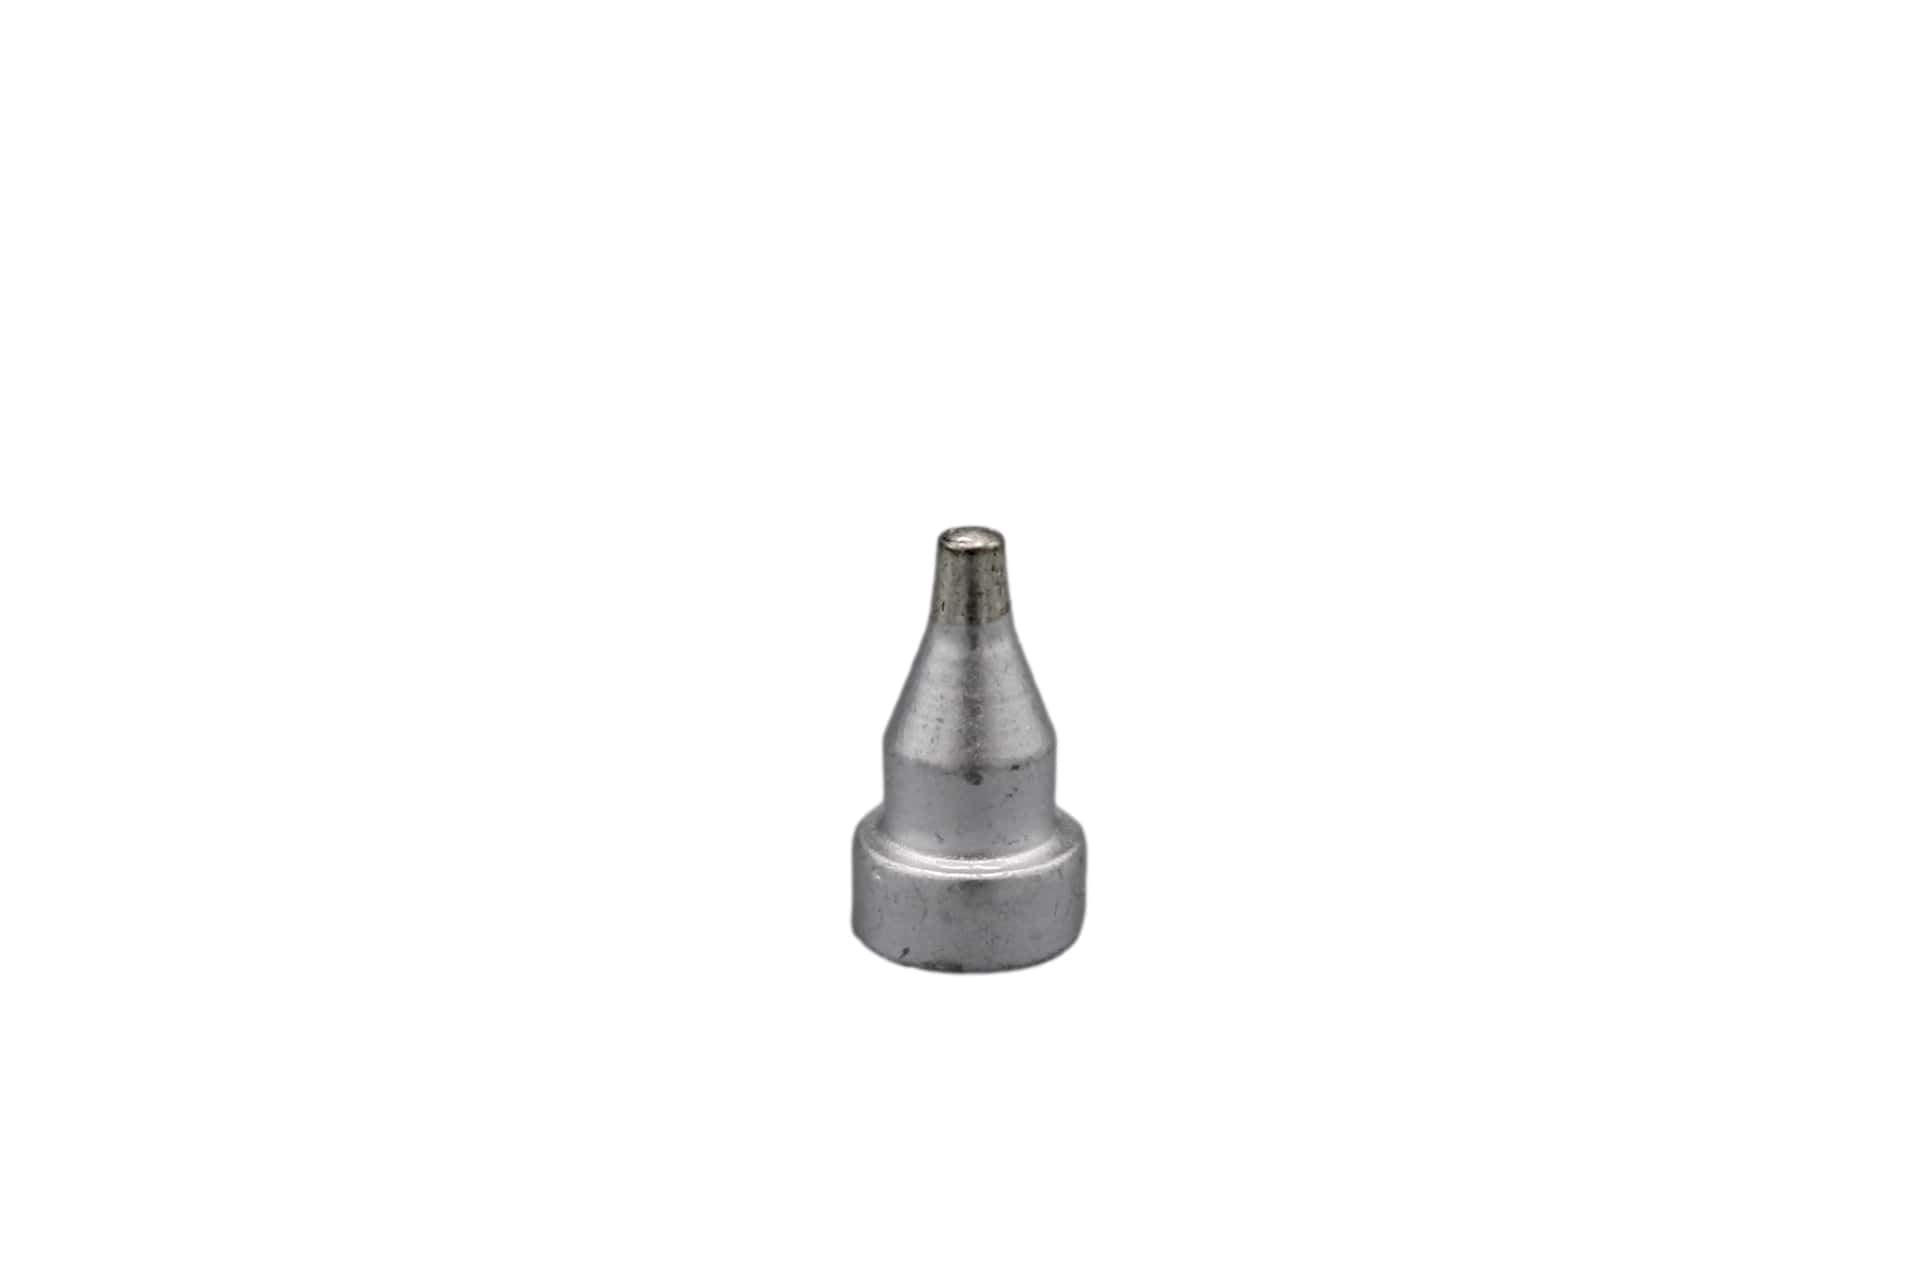 79-1516 N5-1 Replacement soldering tip for ZD-915, ZD917, ZD-985, ZD-987